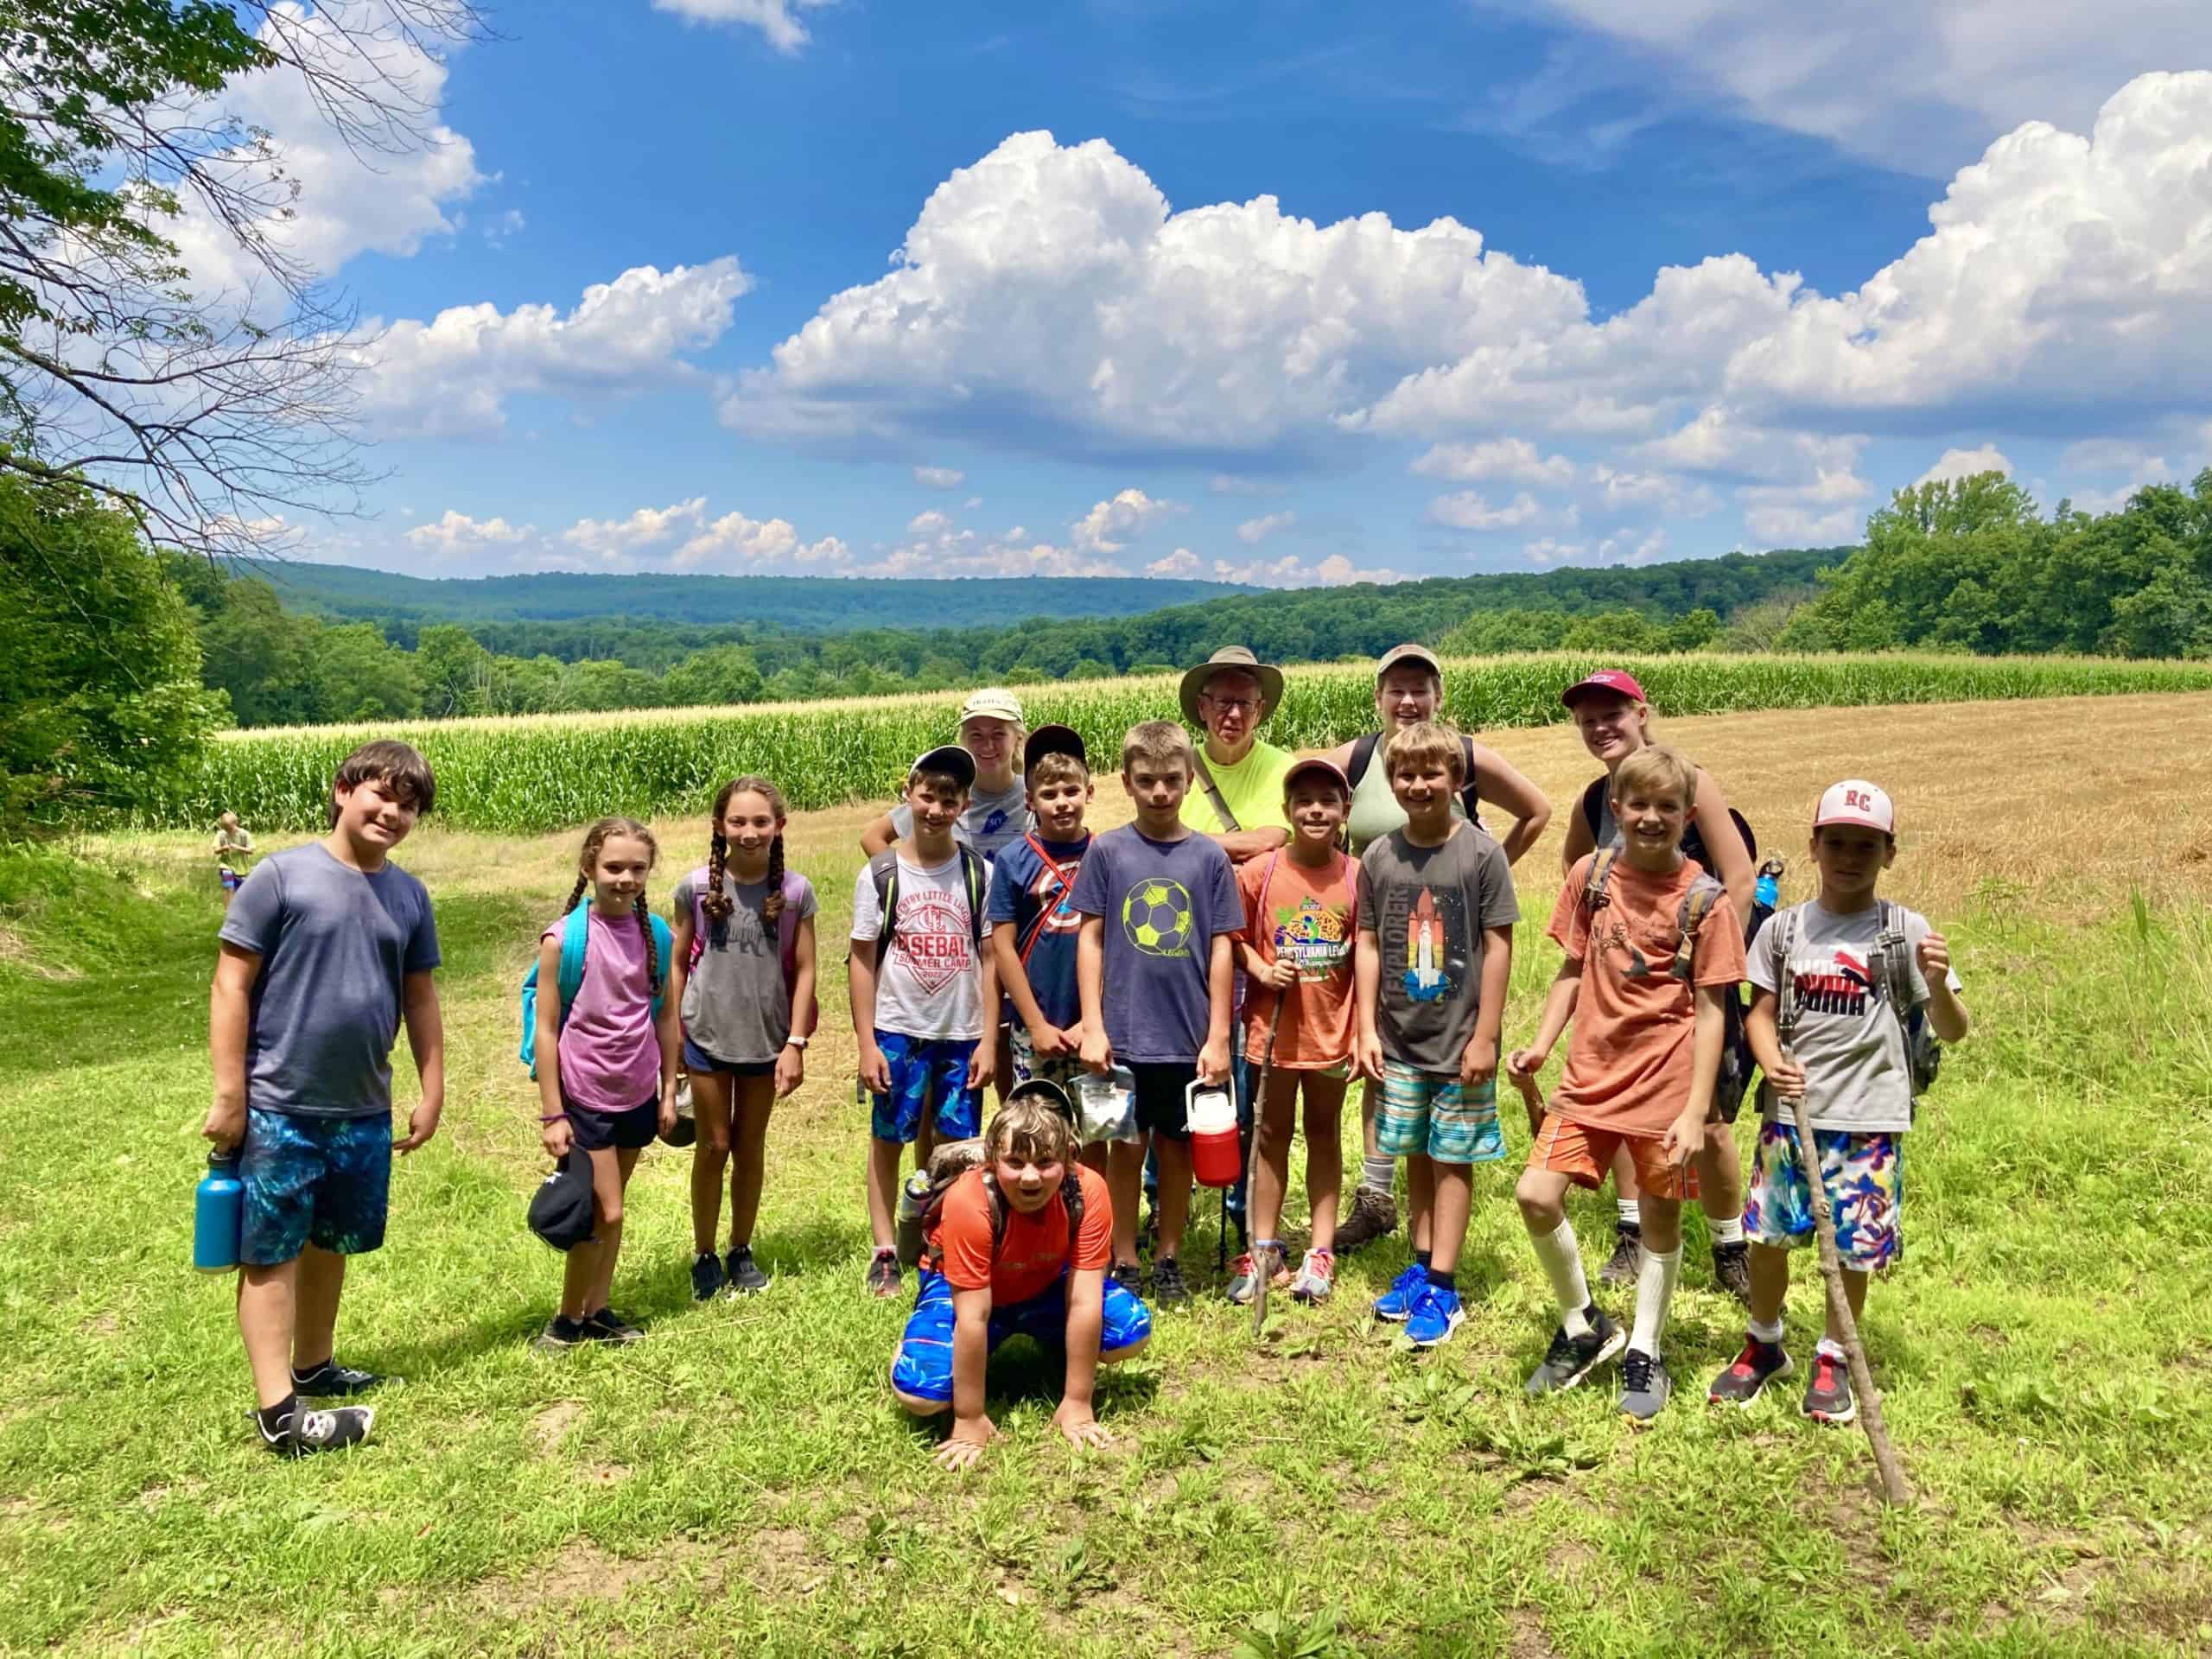 Campers posing for a photo during the Crow's Nest Challenge Hike